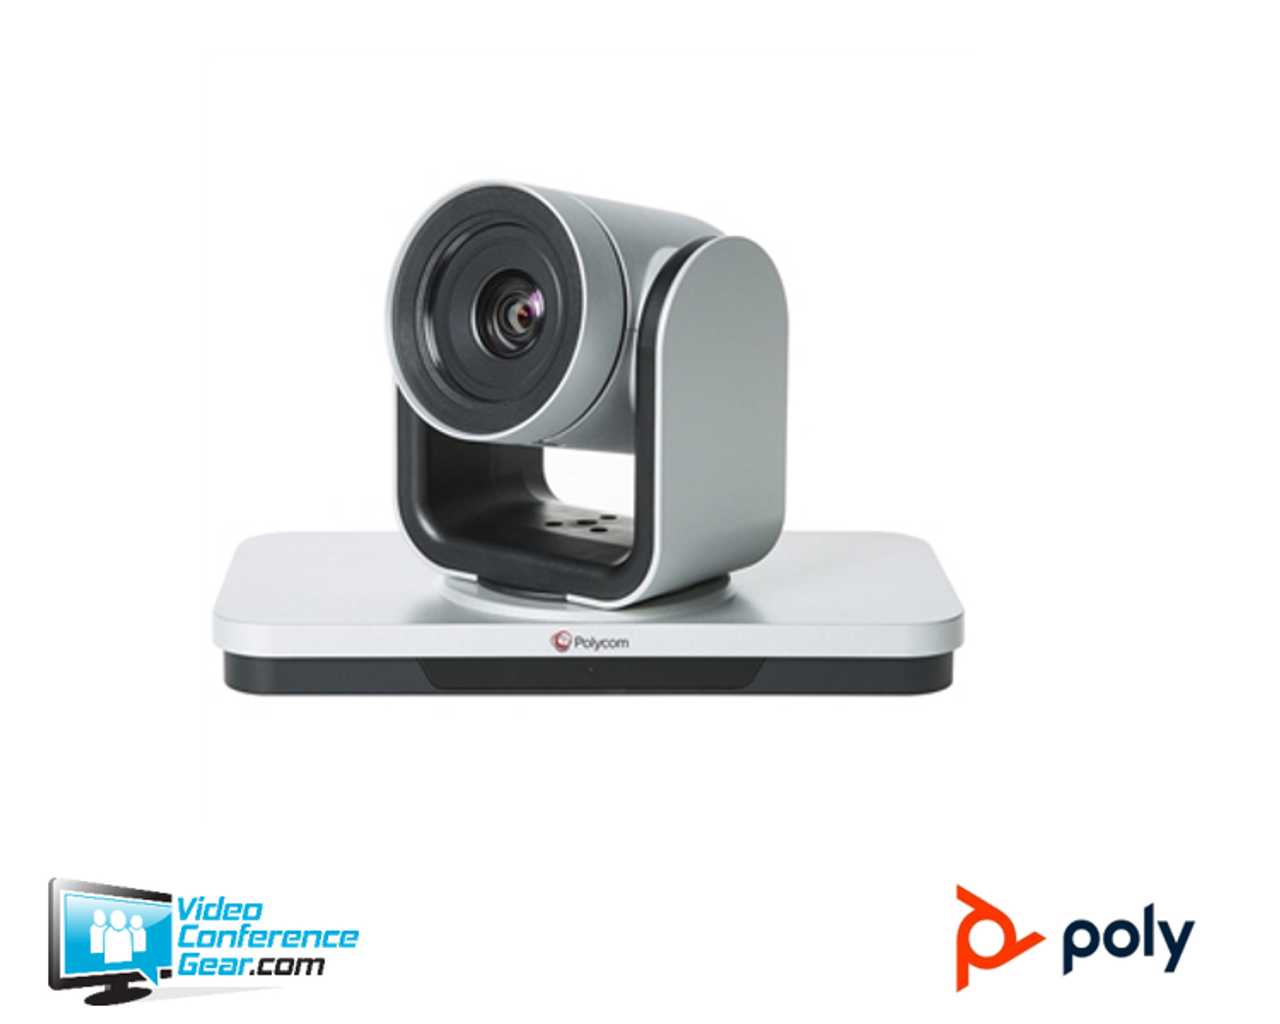 Poly EagleEye IV Video Conferencing Camera with 12x Zoom Perfect for Larger Conference Rooms and Meeting Spaces